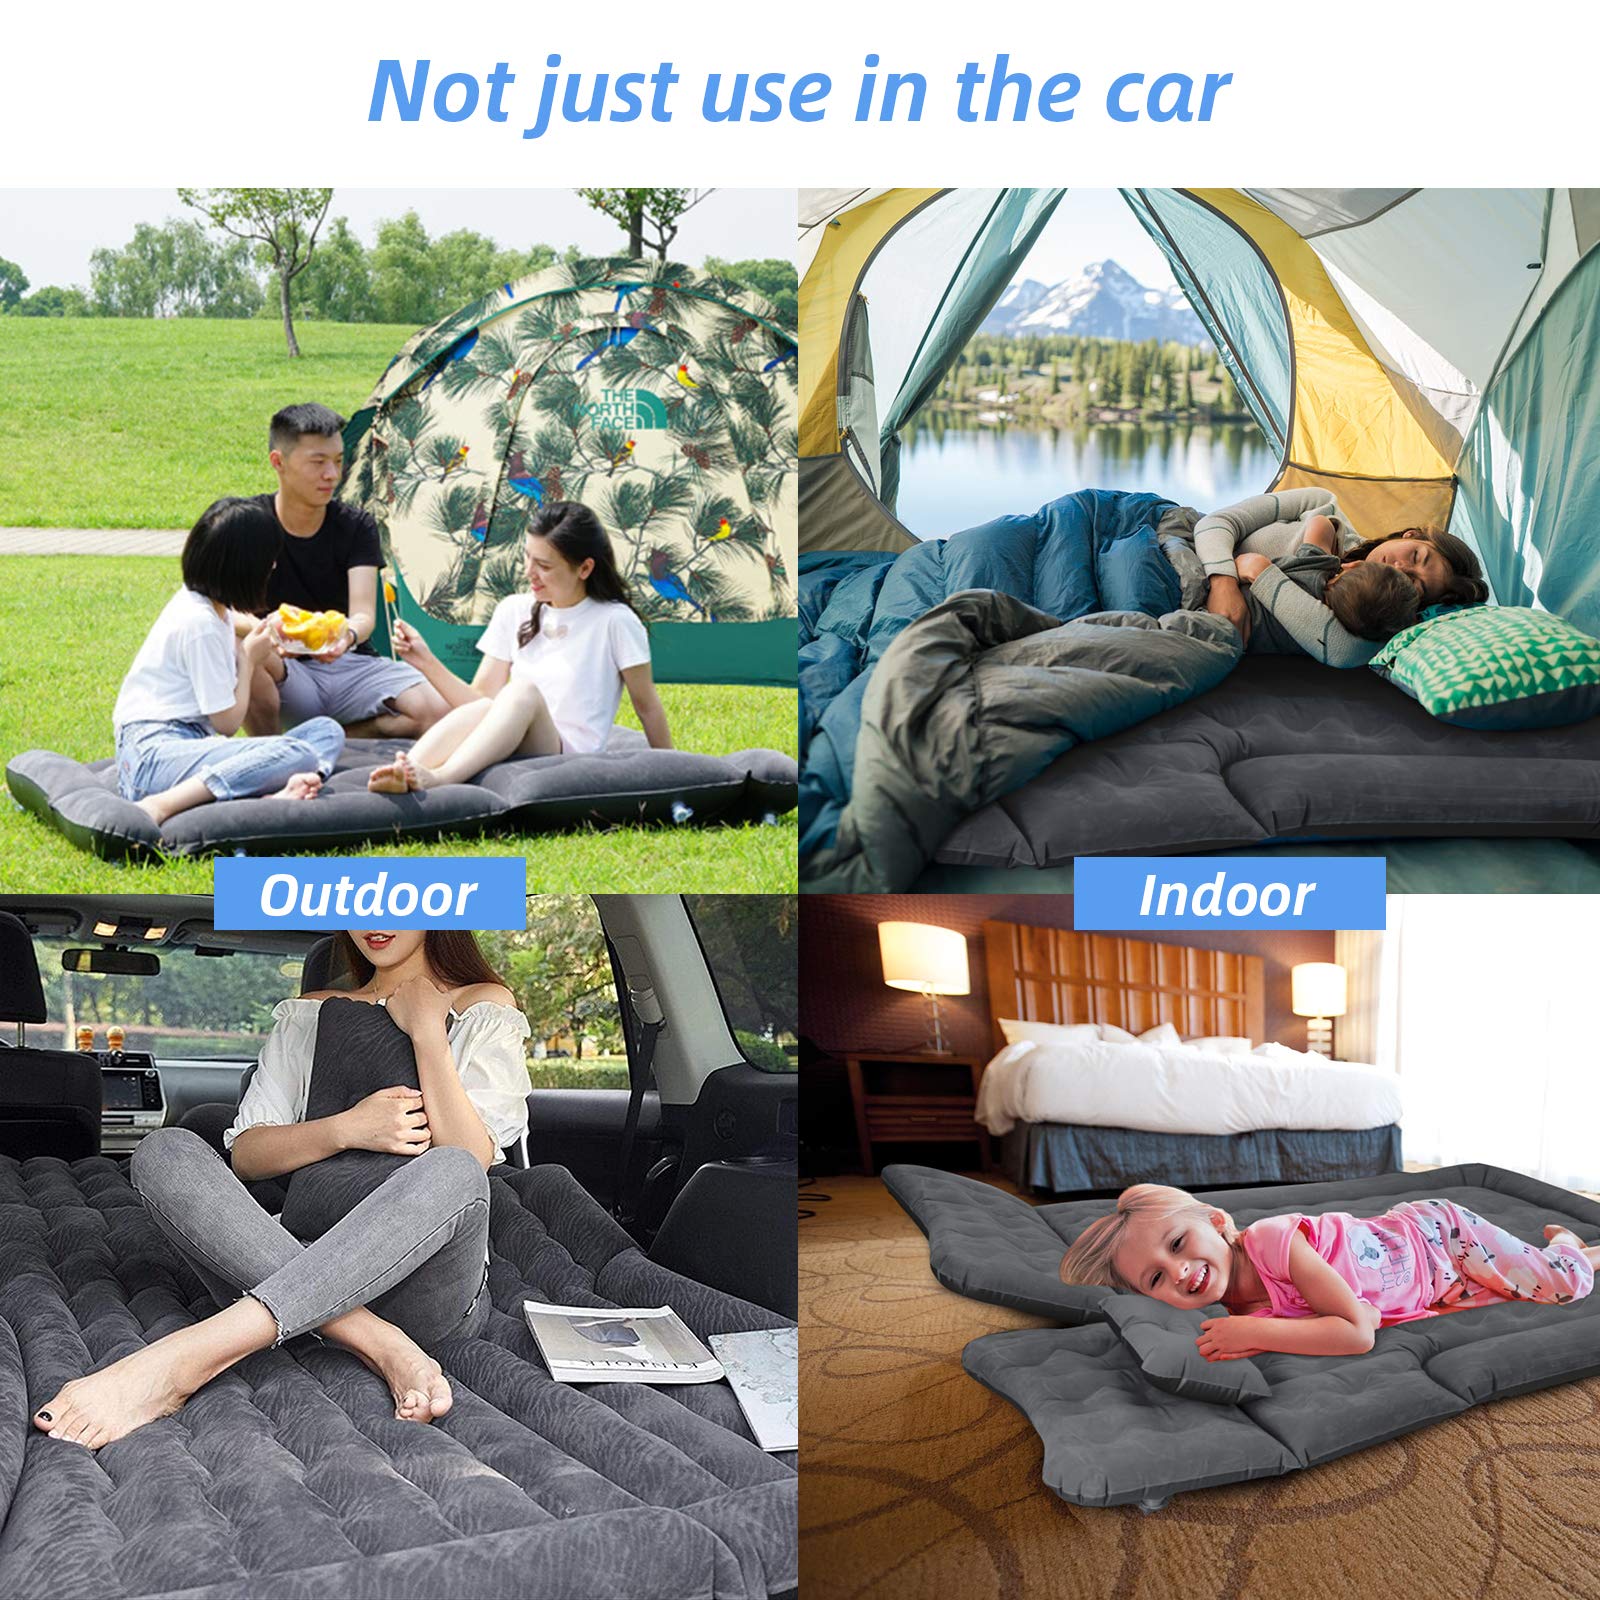 SUV Air Mattress, Inflatable Car Bed with Electric Pump and Pillow, Flocking Surface, Camping Sleeping Pad for Travel SUV Sedan Back Seat Trunk Tent Chevy Jeep Wrangler Toyota Honda Civic (Black)